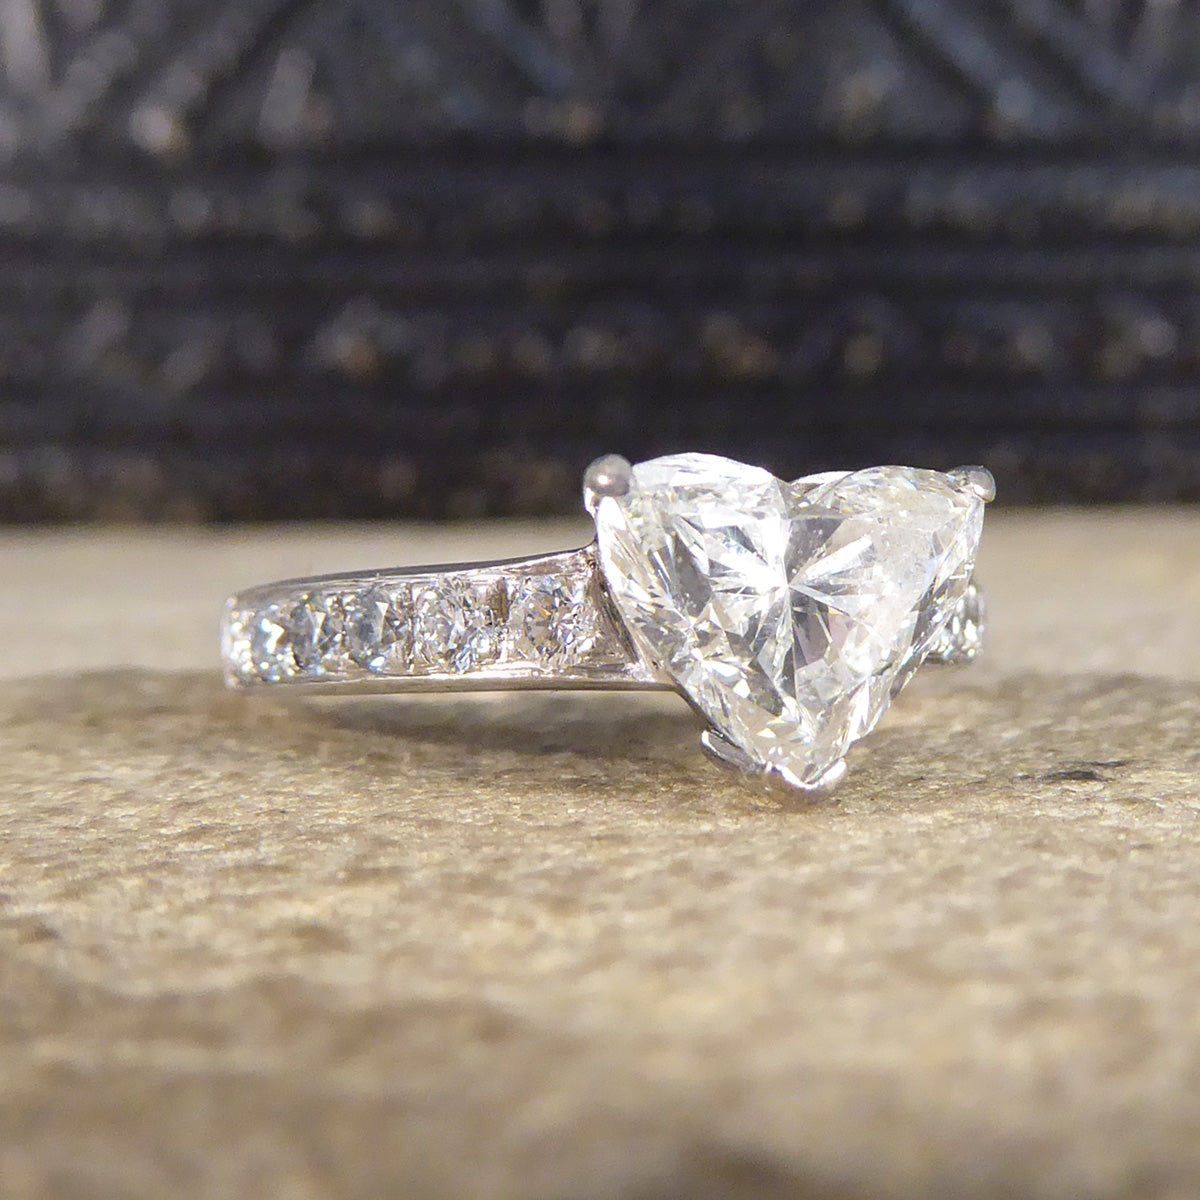 ON HOLD 1.51ct Heart Cut Diamond Engagement Ring with Brilliant Cut Diamond Shoulders in 18ct White Gold